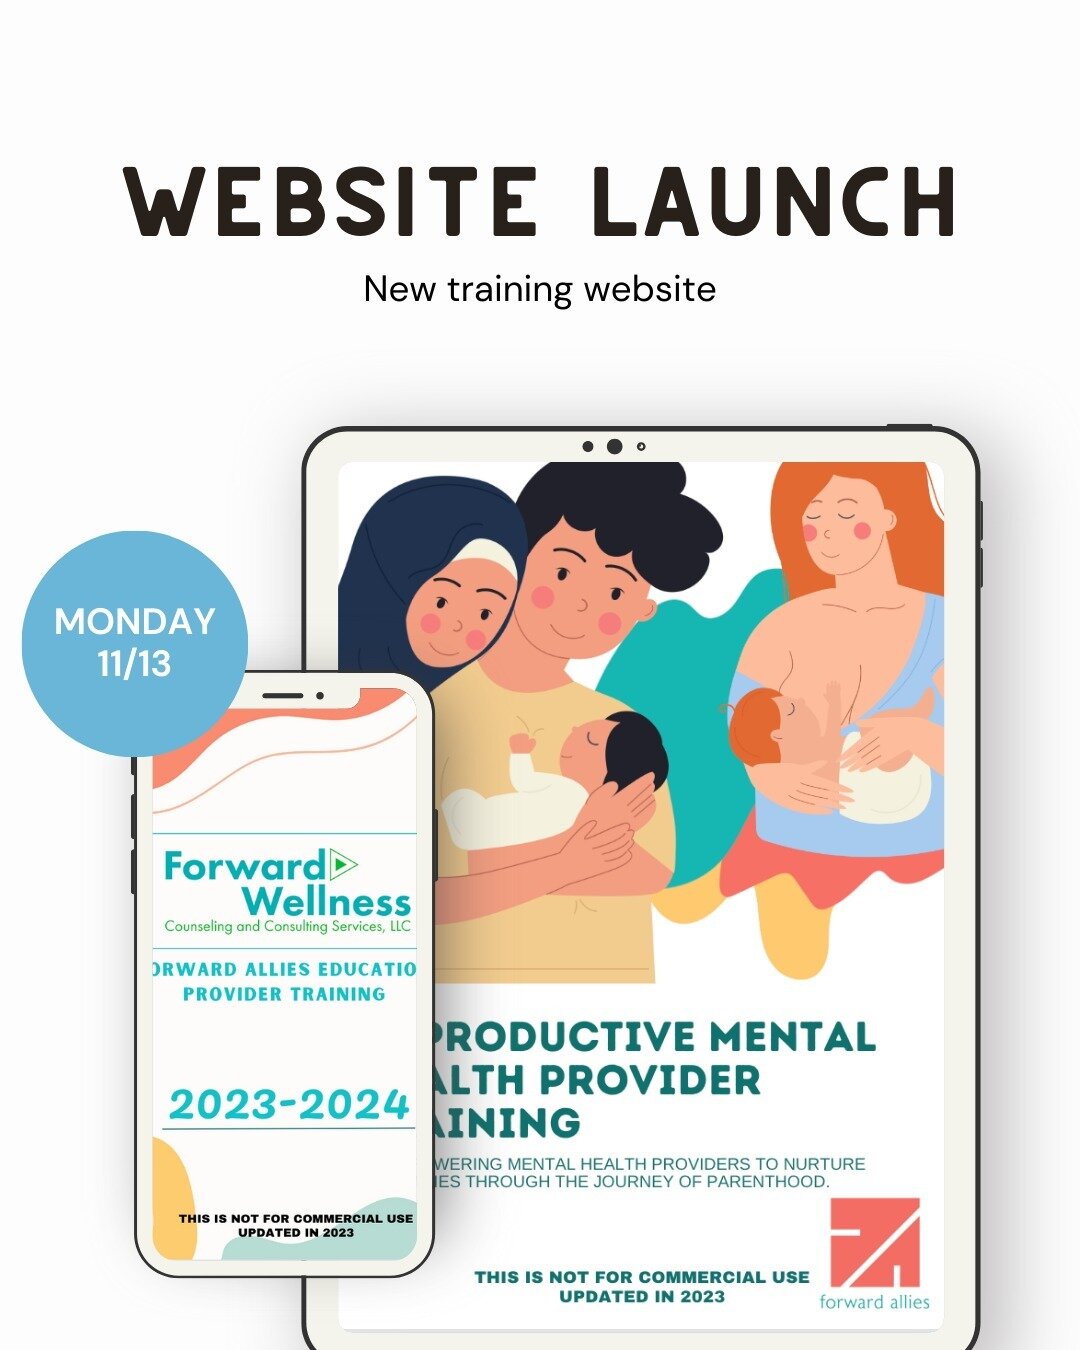 Monday! 

We officially launch the fourth cohort of the Reproductive Mental Health Provider Training!

Check out the website in the morning to learn about updates + how to register.

@forwardallieseducation 
@loveoverfearwellness 
@journeylighter